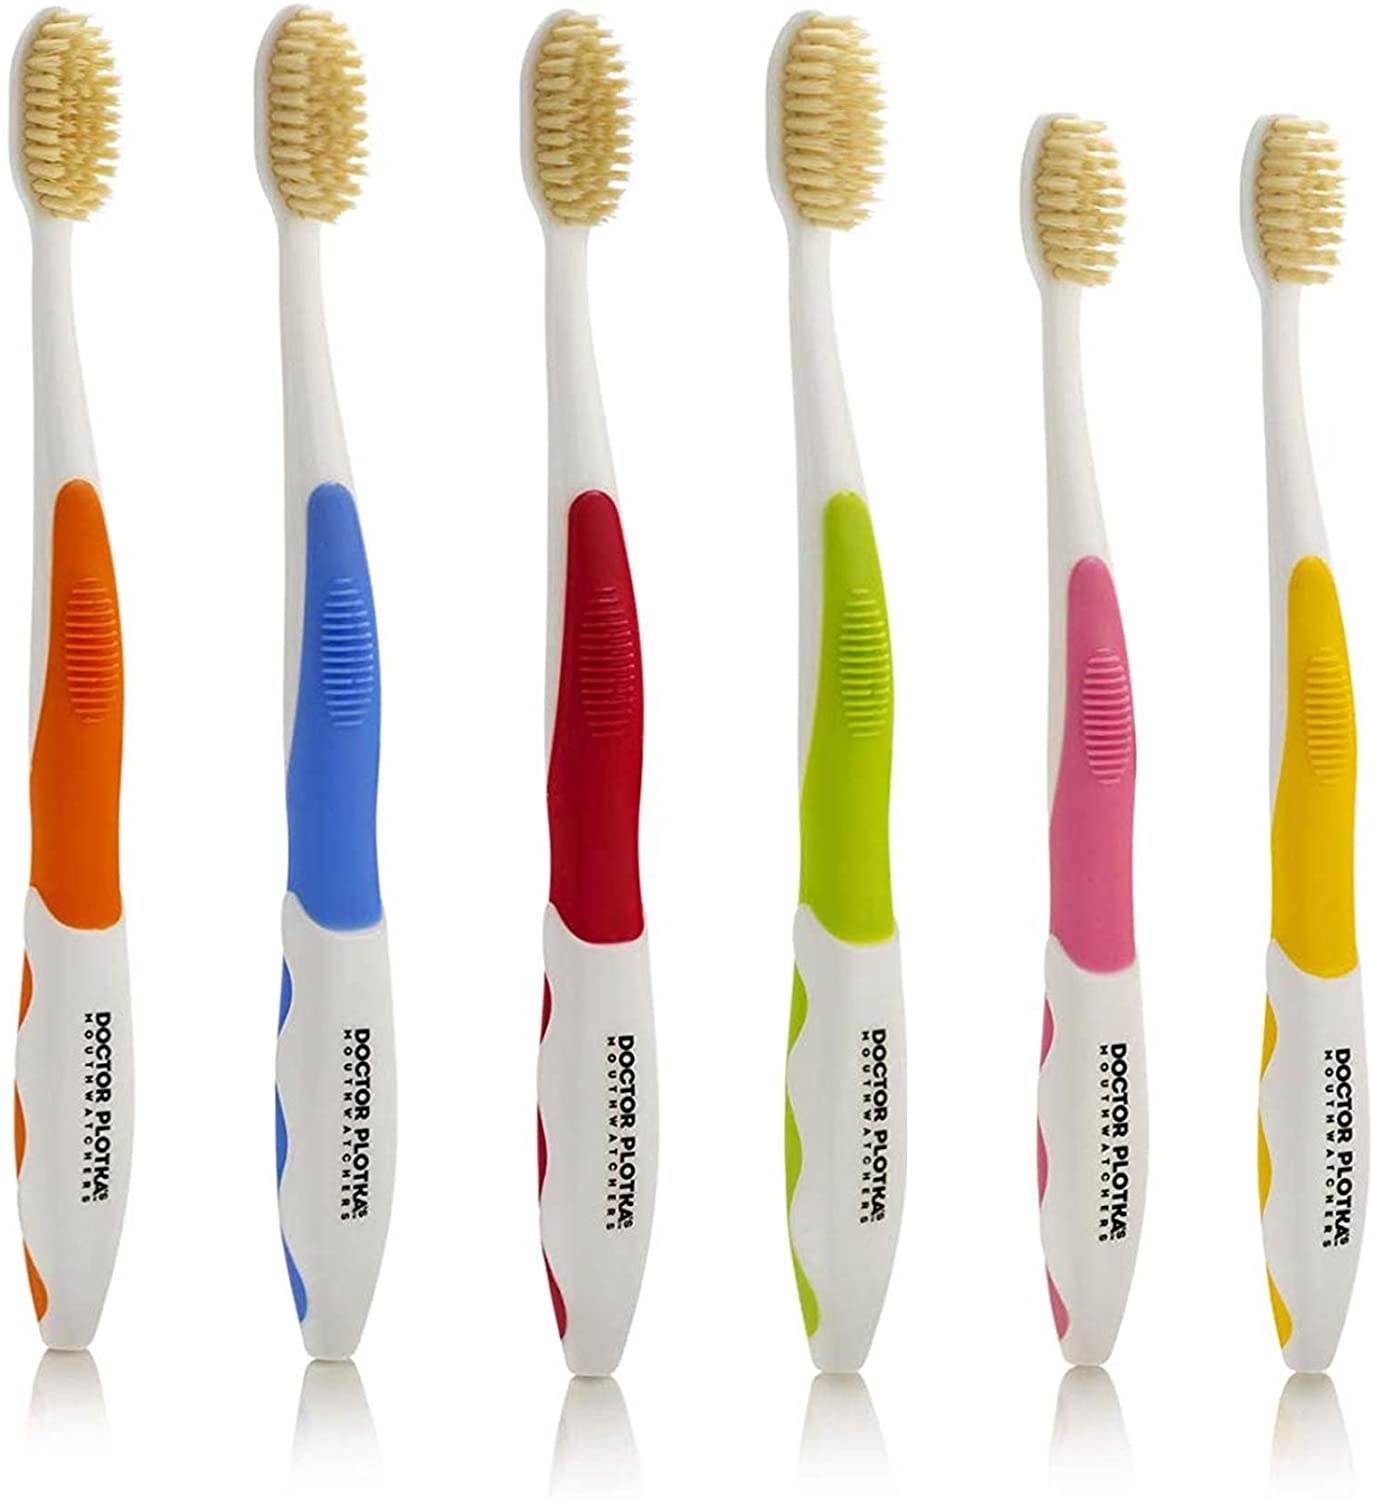 Four large and two small toothbrushes are lined up side by side